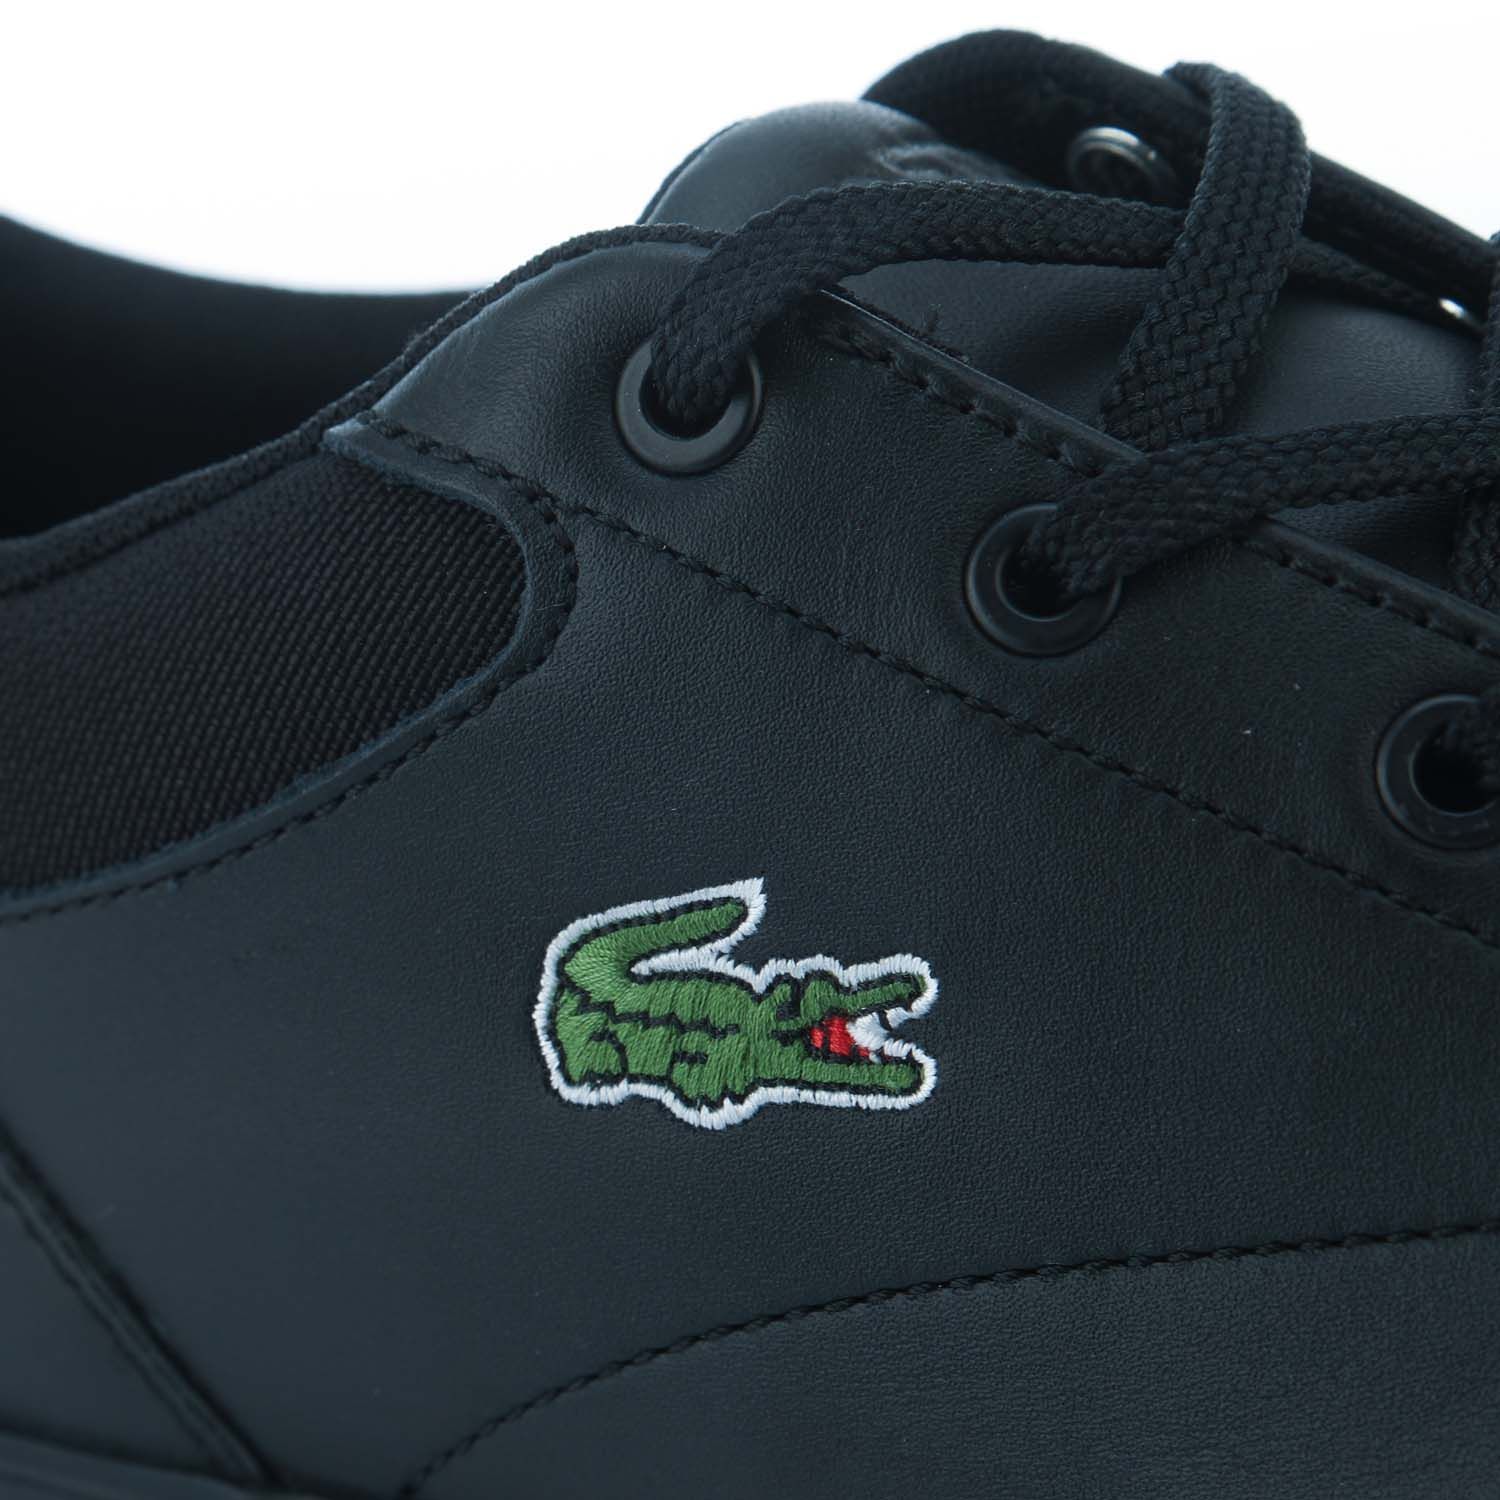 Mens Lacoste Bayliss Trainers in black.- Synthetic leather upper.- Lace up fastening.- Lace detail to the heel.- Ortholite® insole.- Tonal embroidered tongue branding.- Embroidered branding. - Rubber sole.- Leather upper  Textile lining  Synthetic sole.- Ref: 743CMA004802H